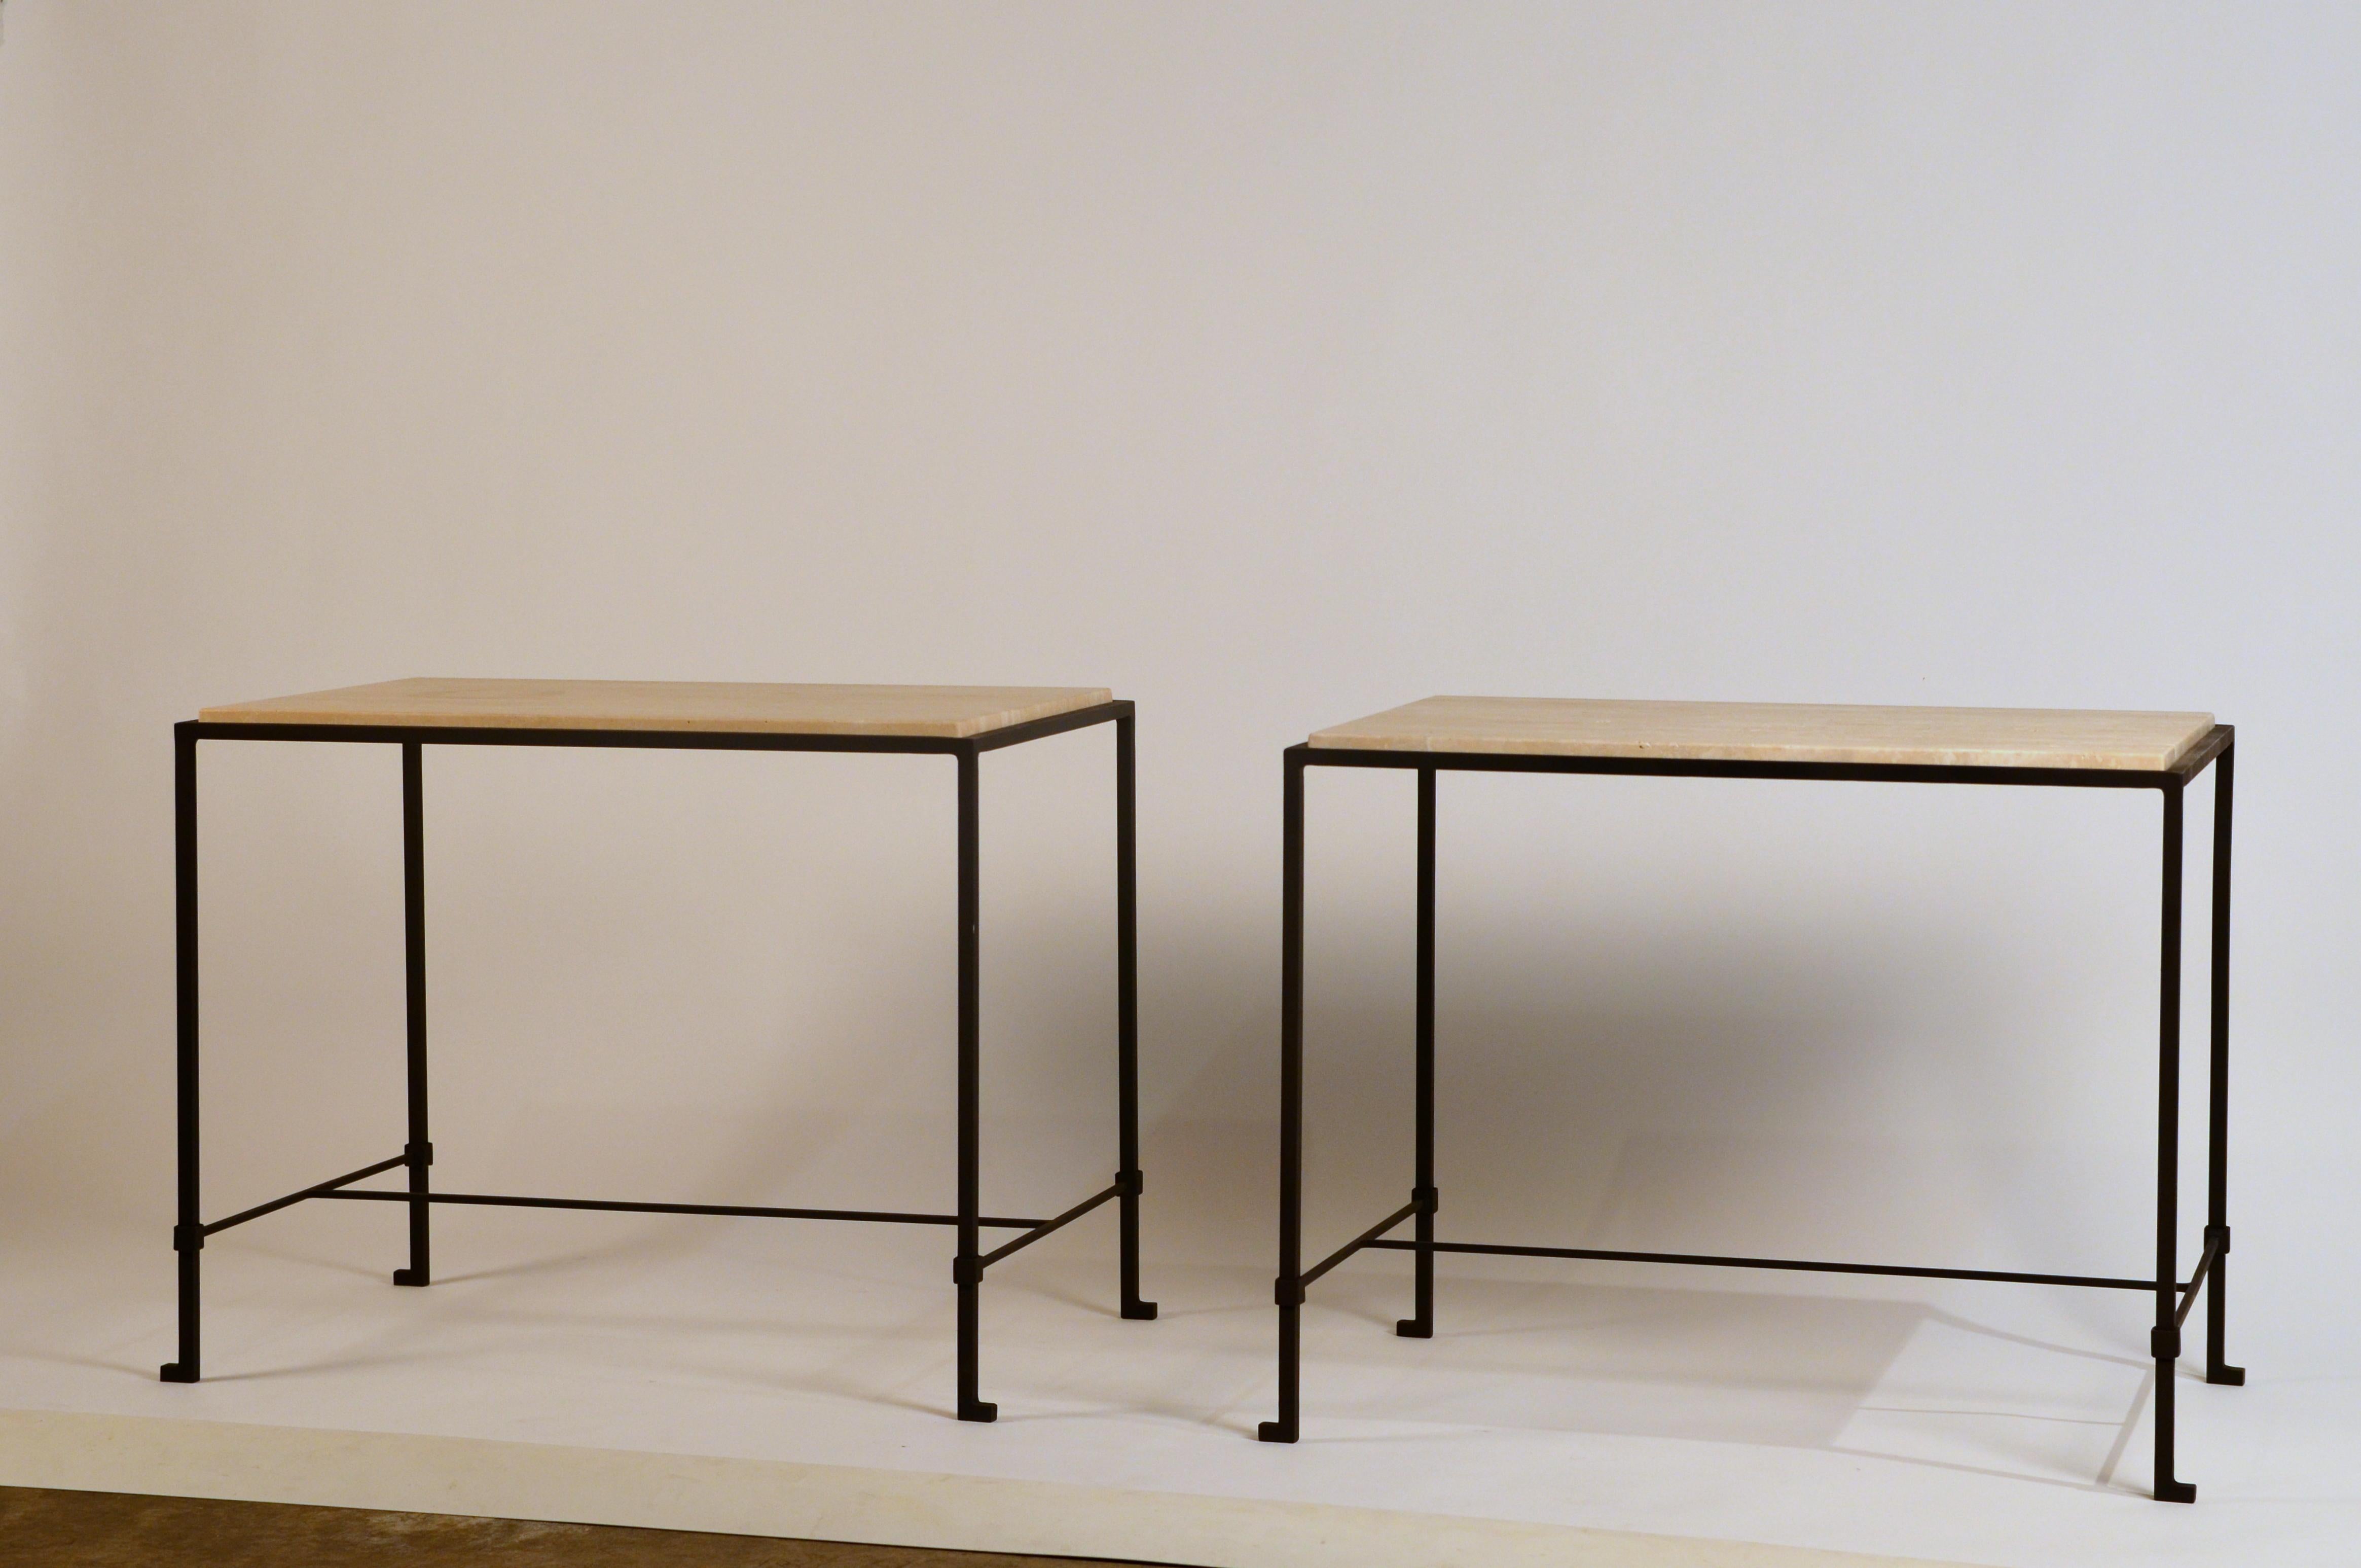 Pair of 'Diagramme' wrought iron and travertine side tables by Design Frères.

Lower bar is 4.5